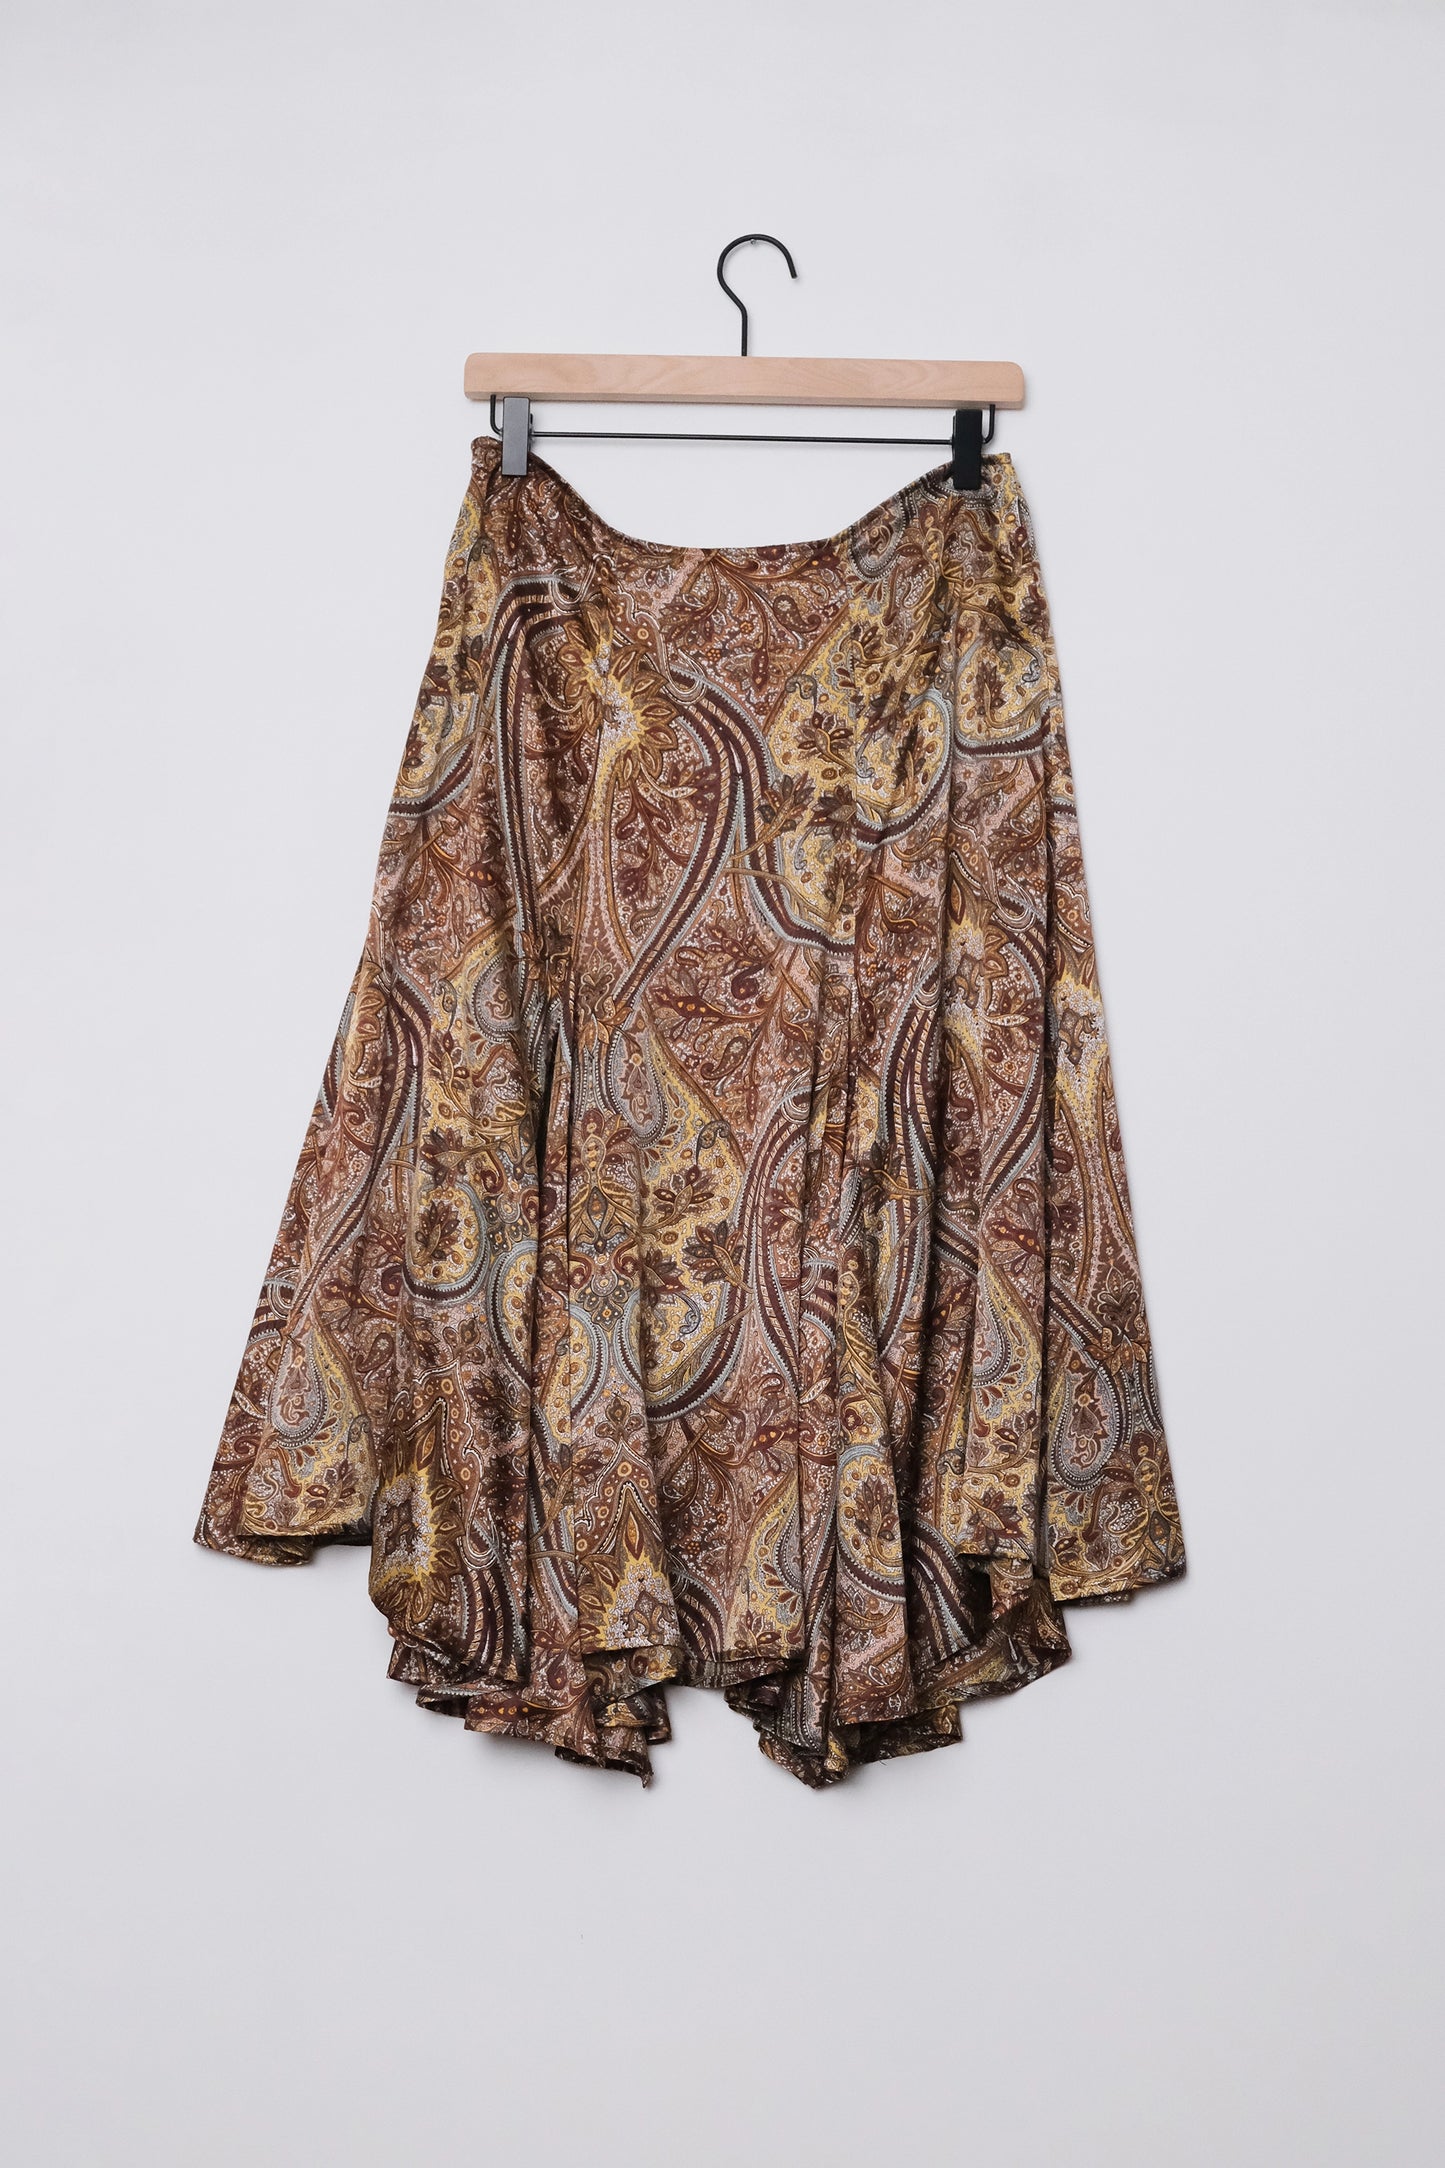 ISDA & Co Silk Floral Paisley Hanky Skirt Low Rise US 8, Y2K